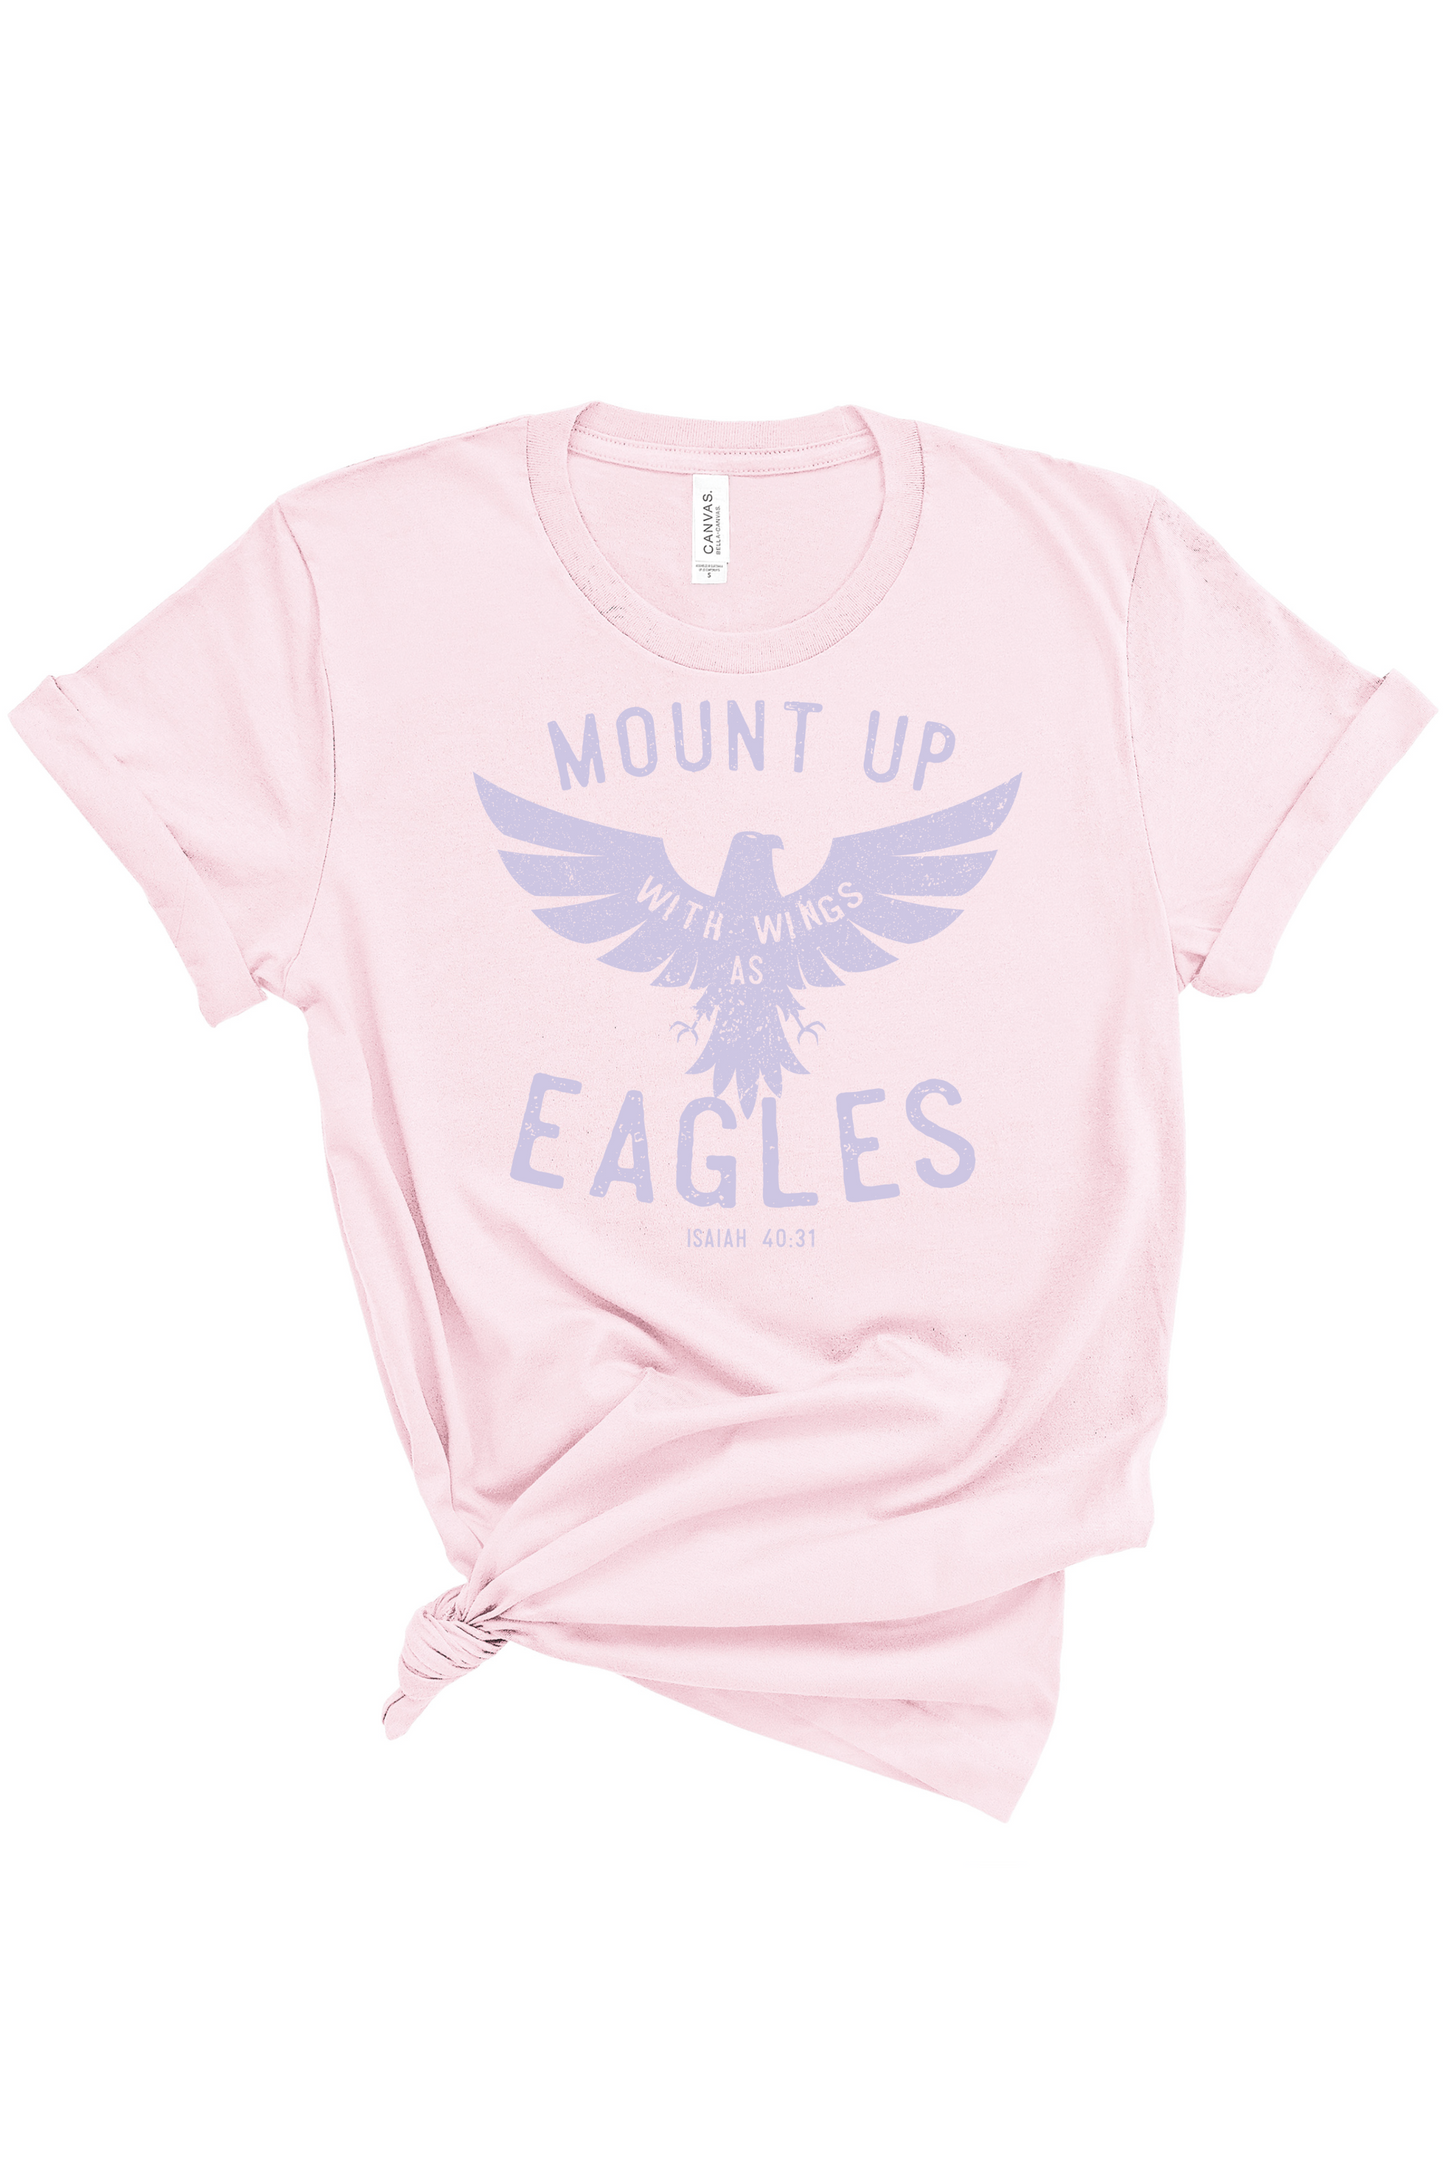 Wings Like Eagles | Adult Tee-Sister Shirts-Sister Shirts, Cute & Custom Tees for Mama & Littles in Trussville, Alabama.